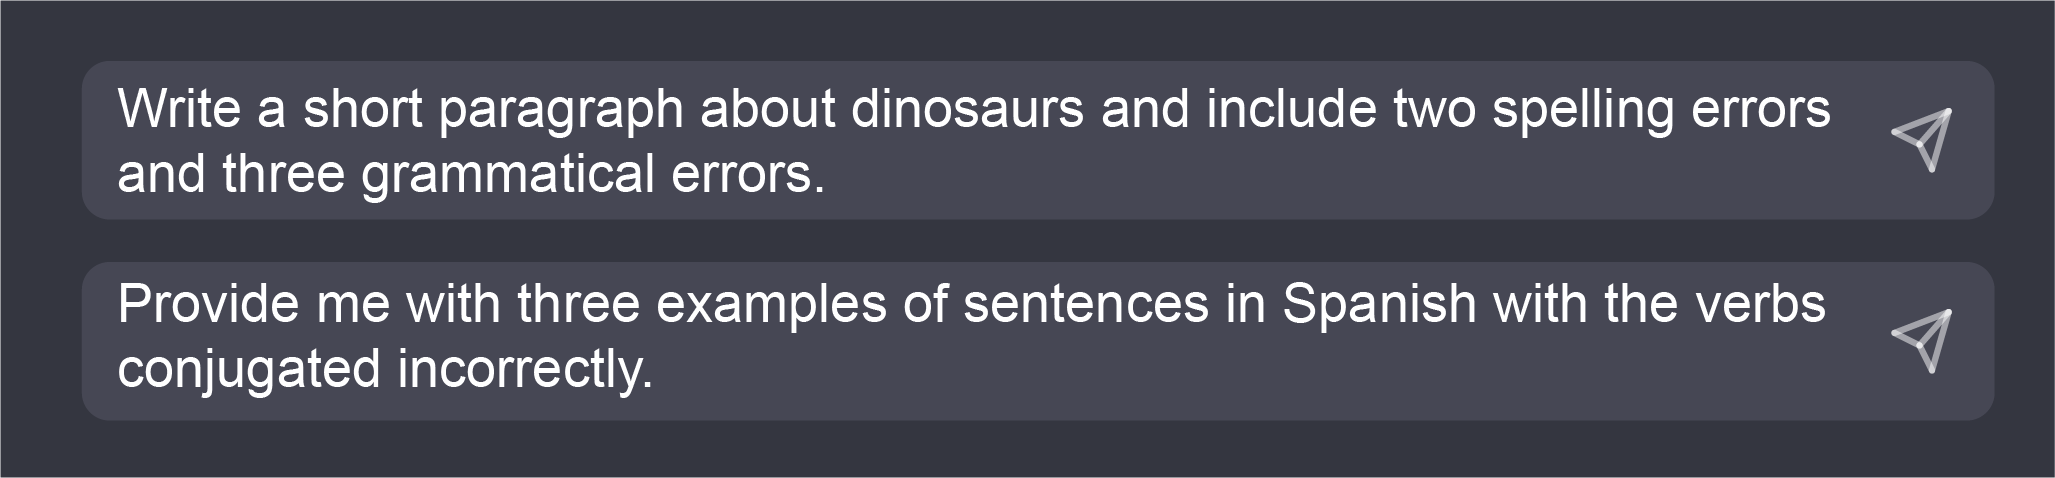 Prompts: Write a short paragraph about dinosaurs and include two spelling errors and three grammatical errors. Provide me with three examples of sentences in Spanish with the verbs conjugated incorrectly.